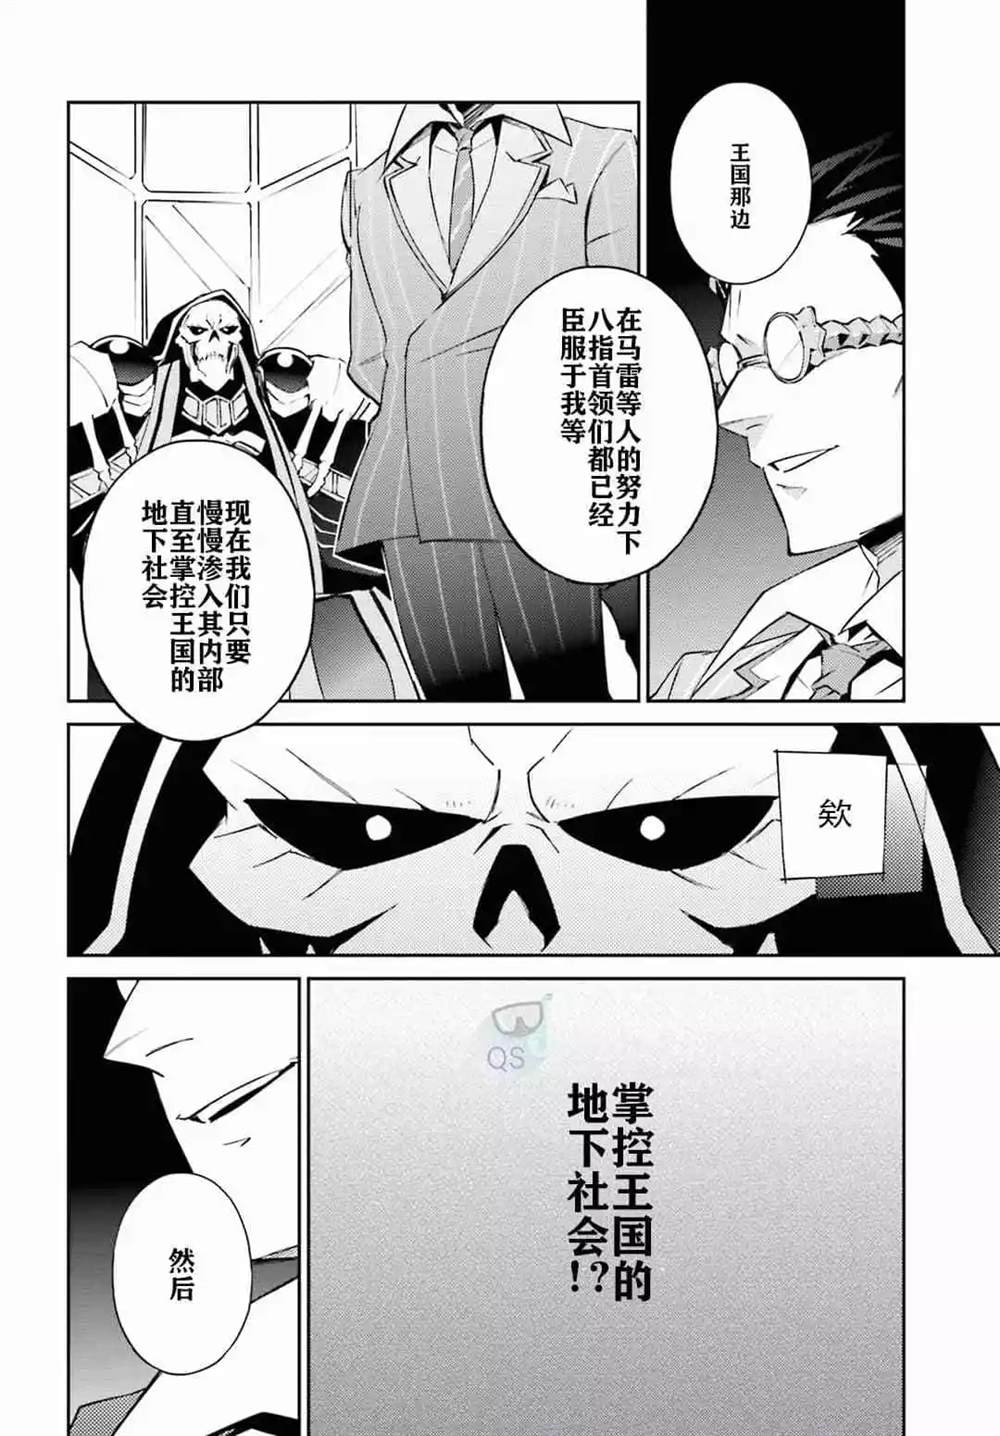 OVERLORD - 第53話 - 2